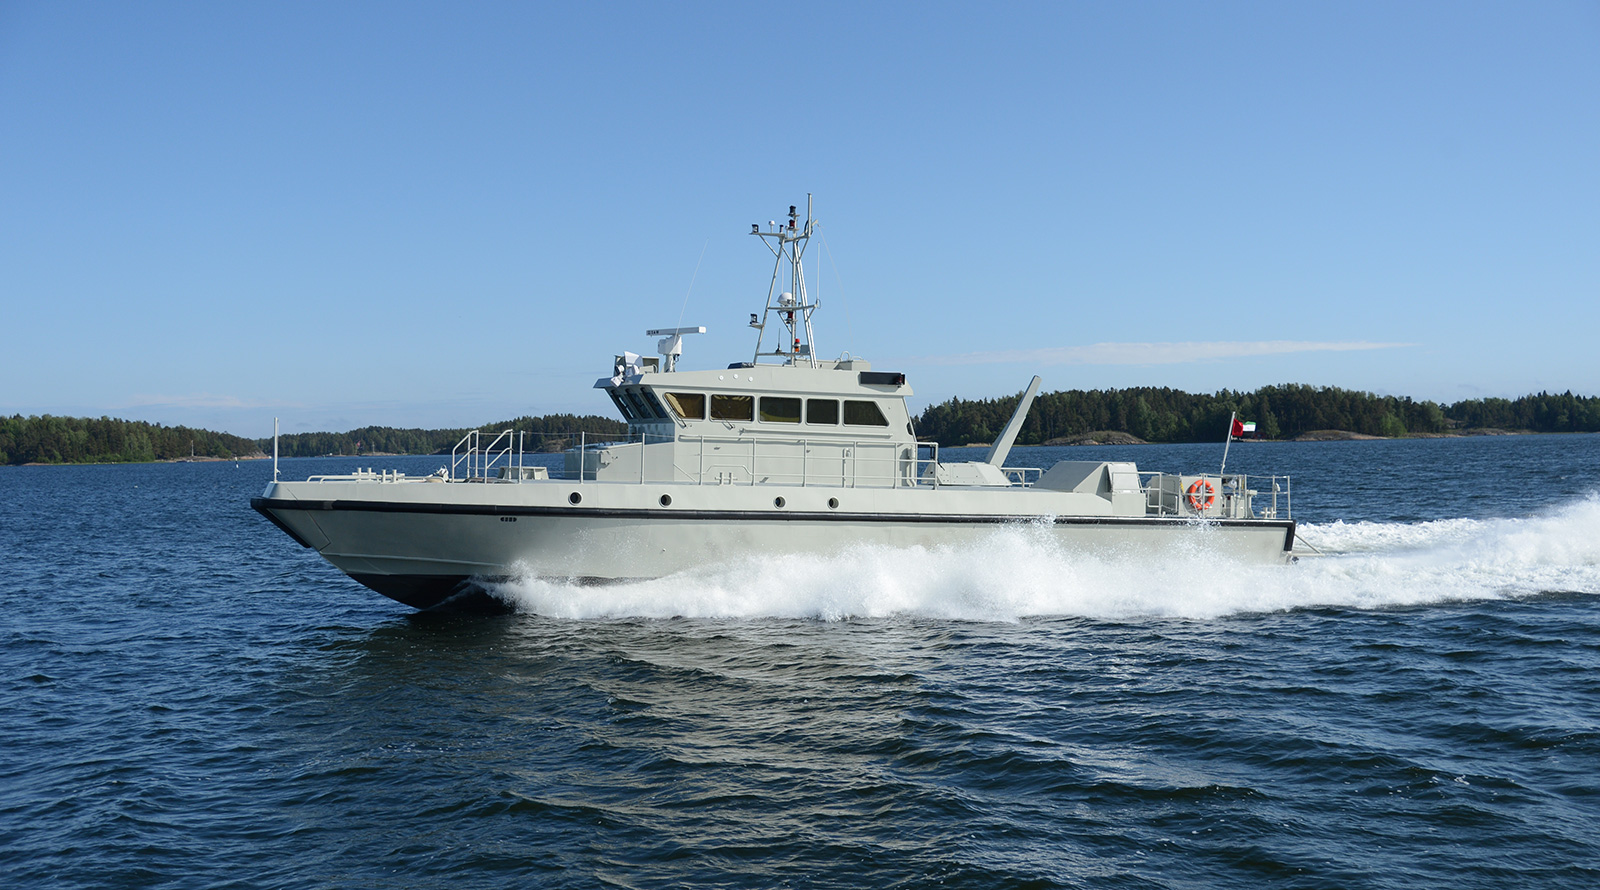 Swede Ship Awarded Swedish Navy Contract to Build 8 Fast Mortar Vessels